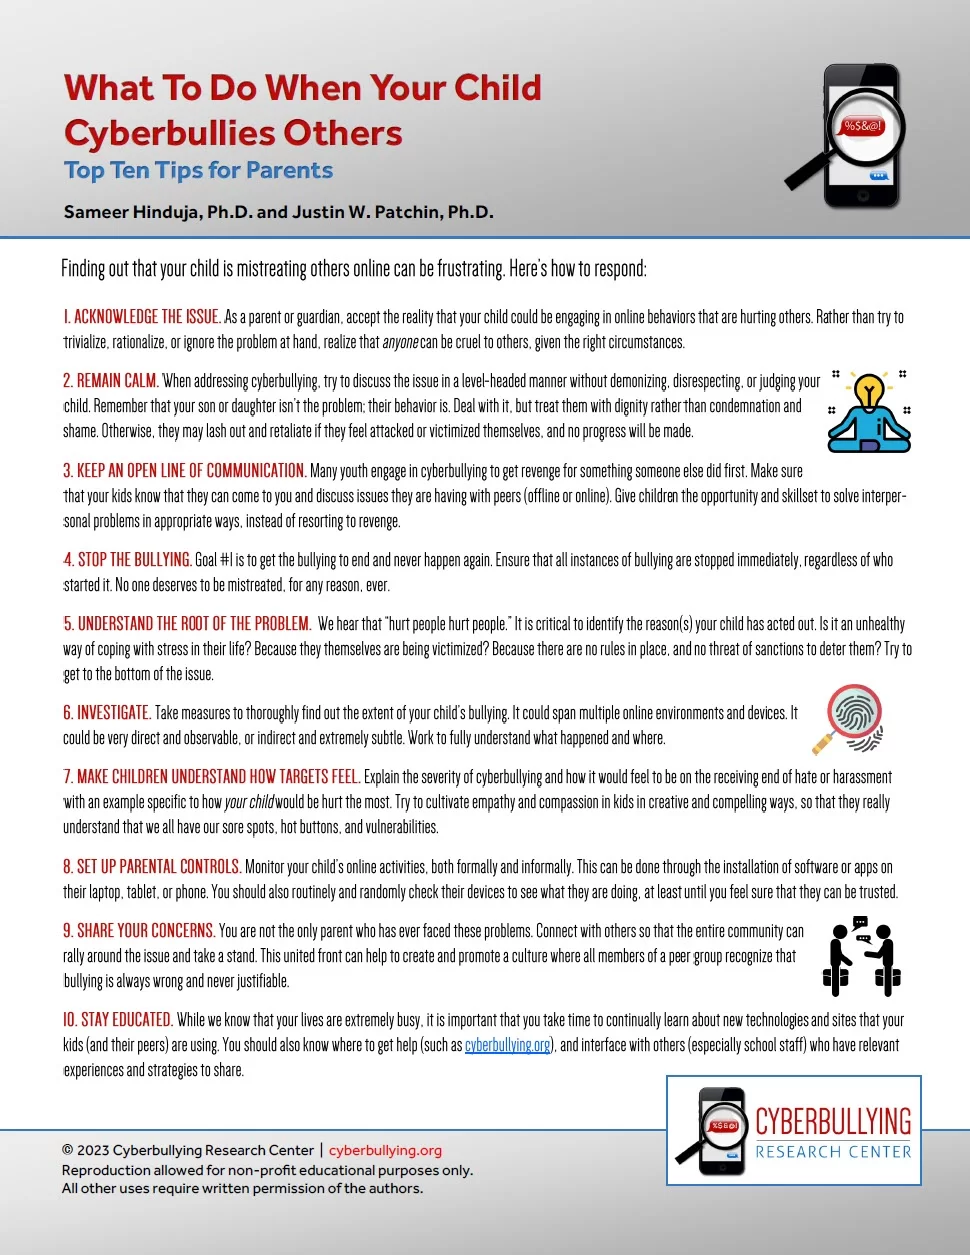 What To Do When Your Child Cyberbullies Others: Top Ten Tips for Parents post thumbnail